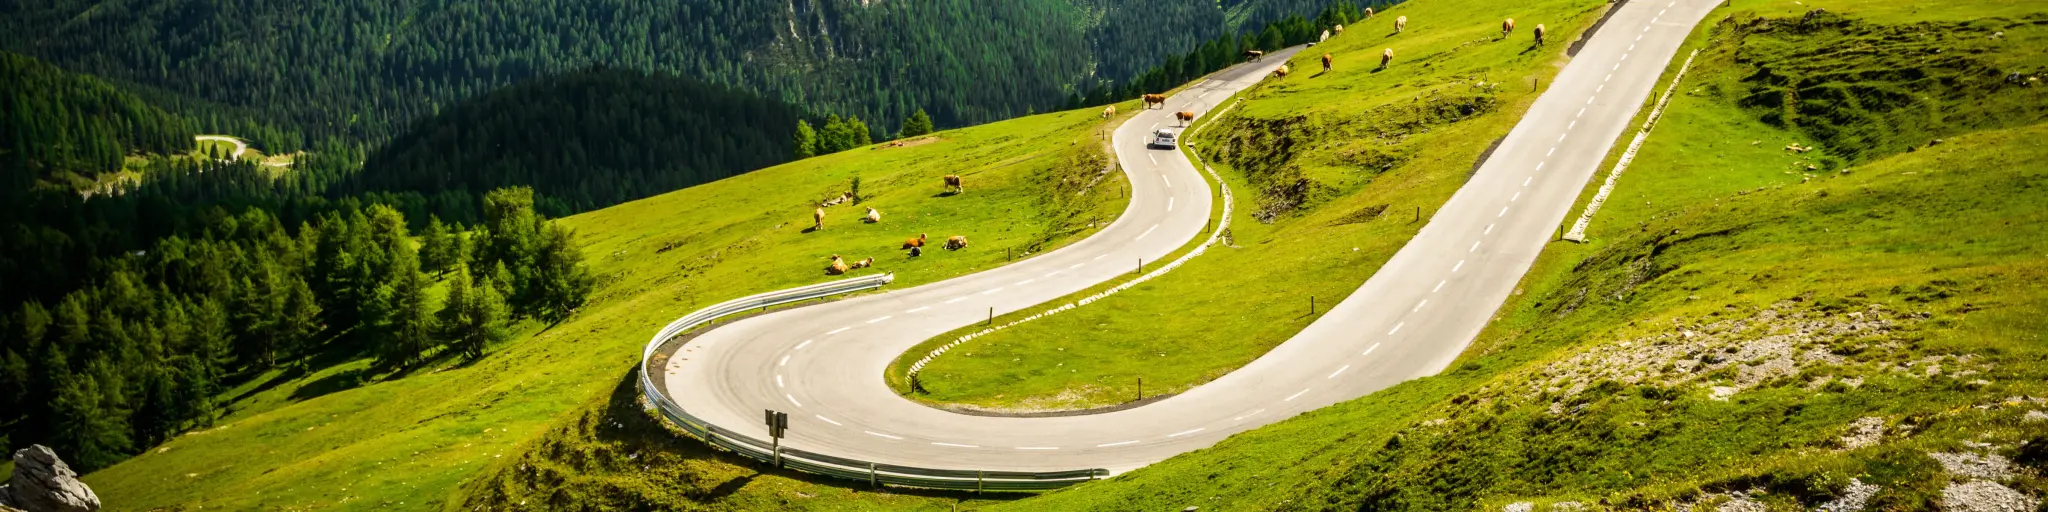 Winding Nockalm Road, Austria with green grass and cattle grazing 